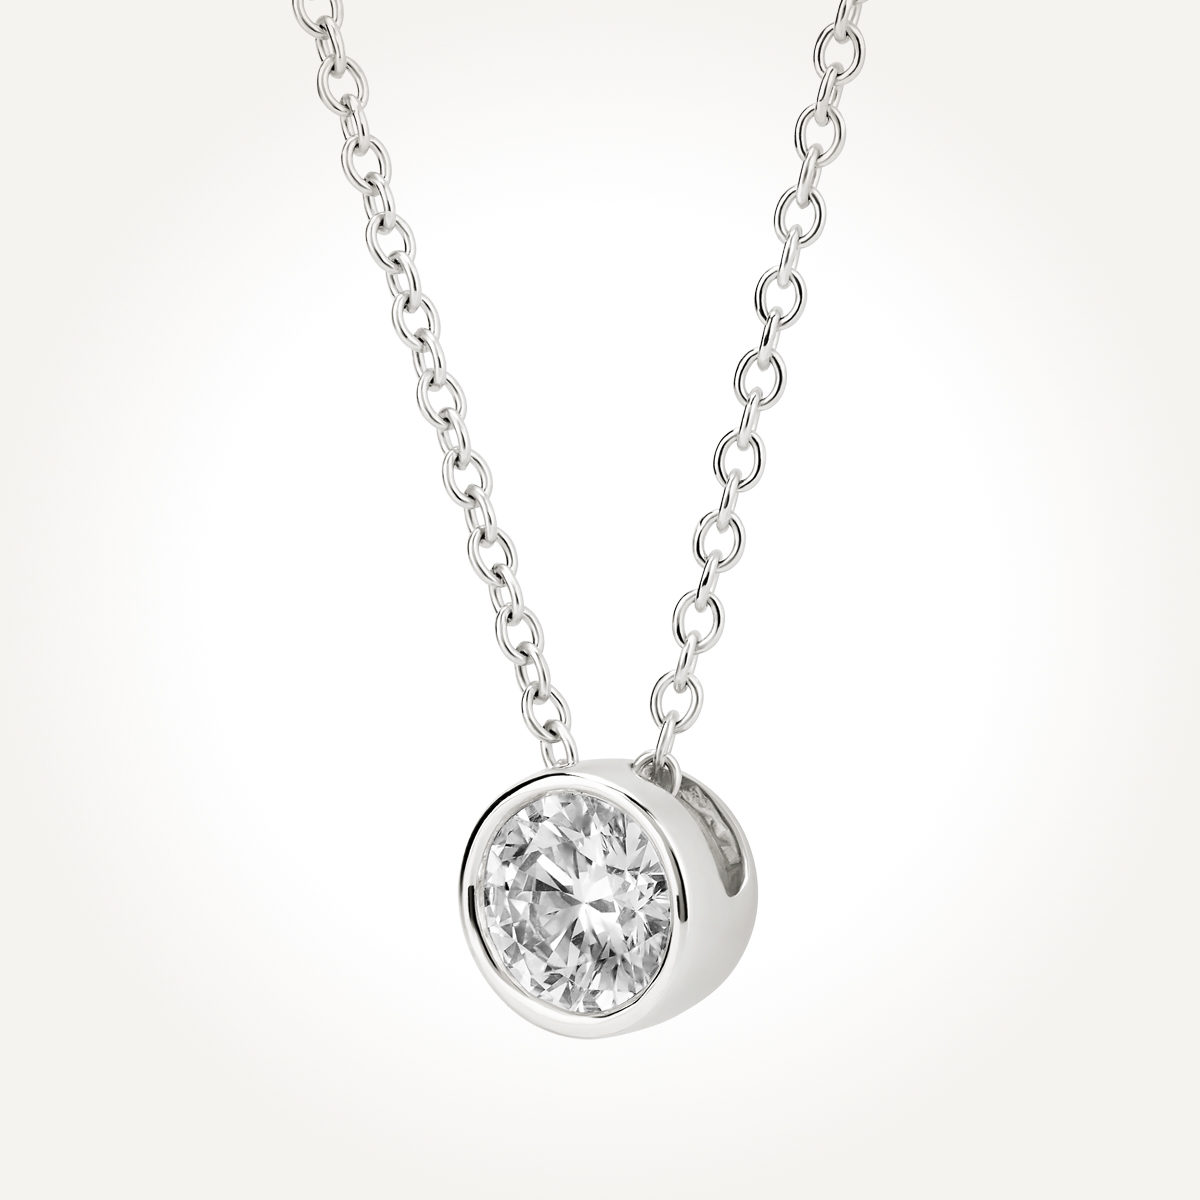 14KT White Gold Round Solitaire Necklace